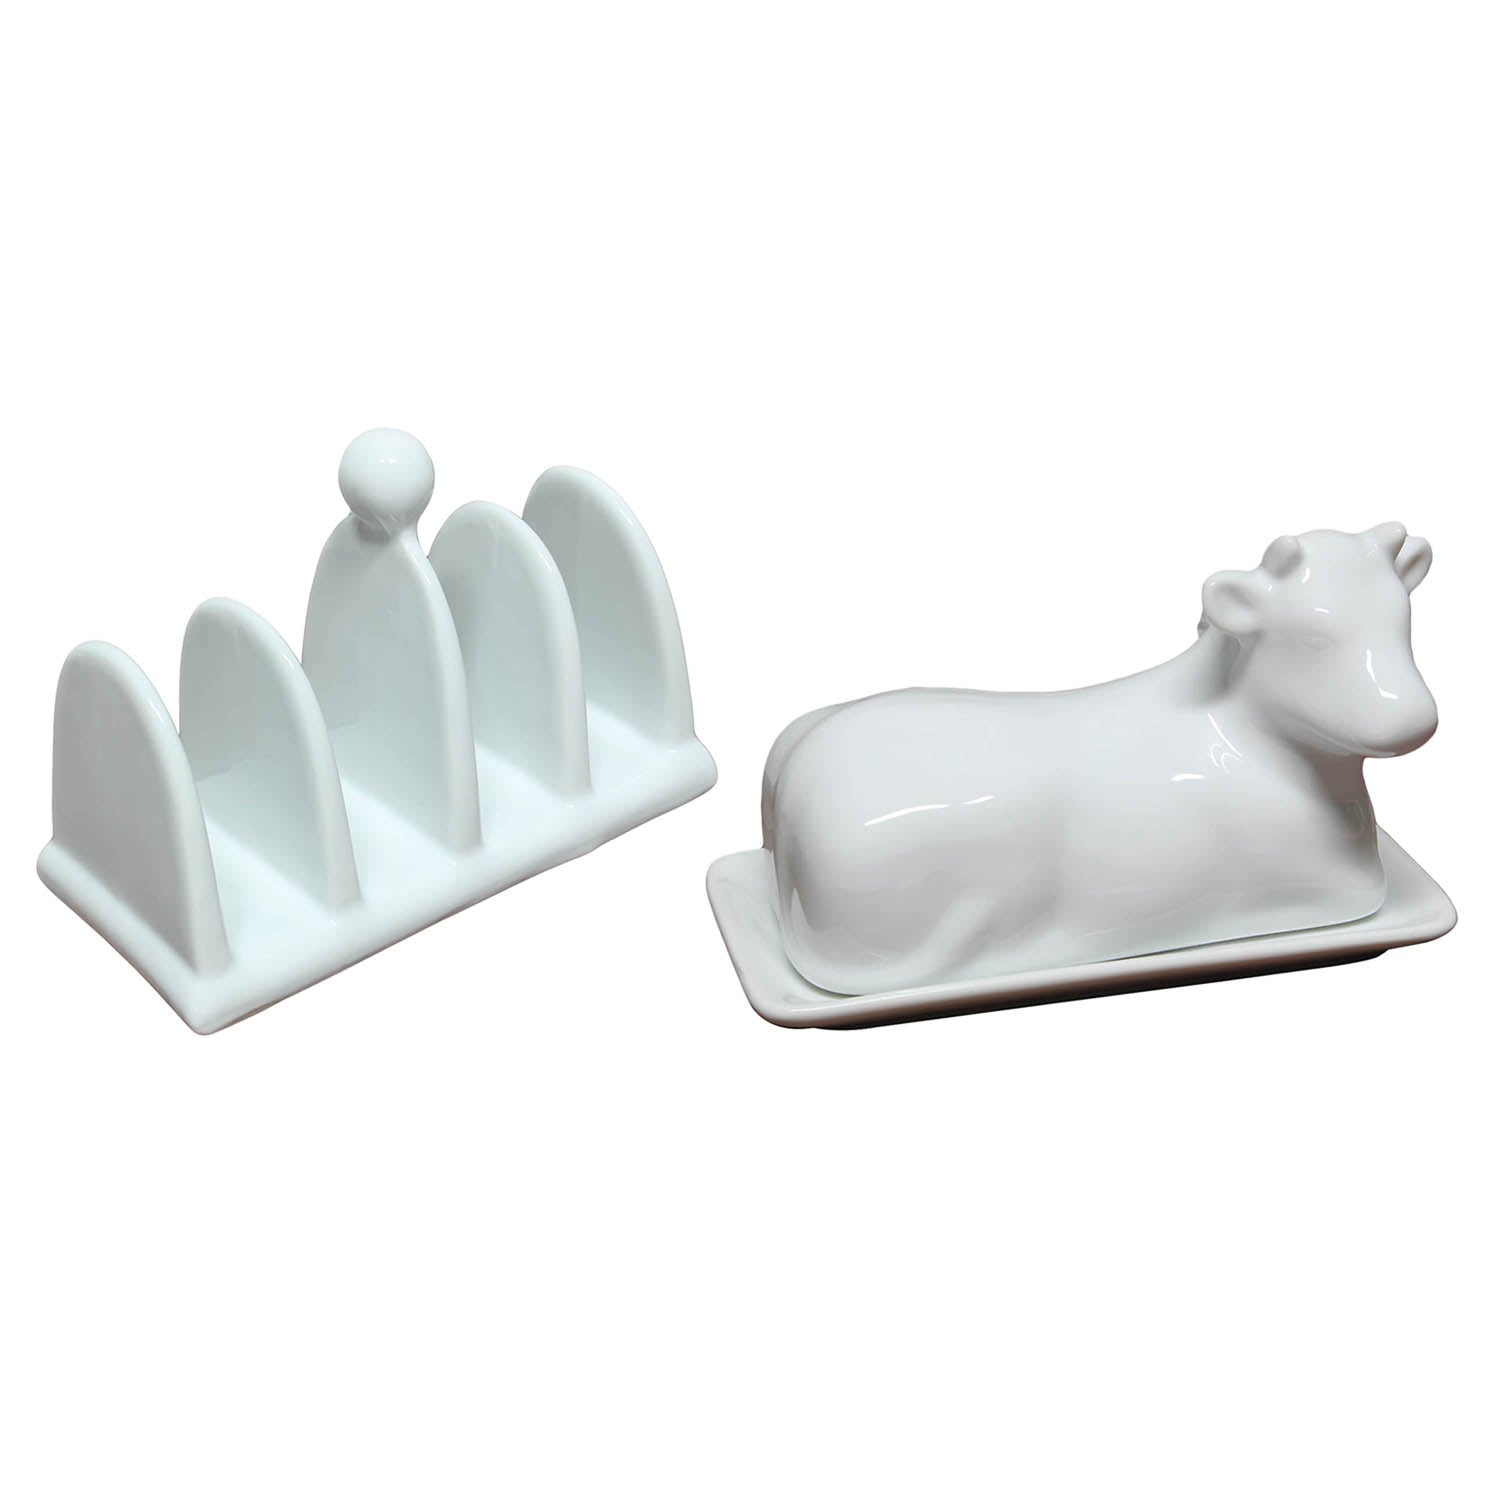 Ceramic Bread Rack and Butter Dish Set